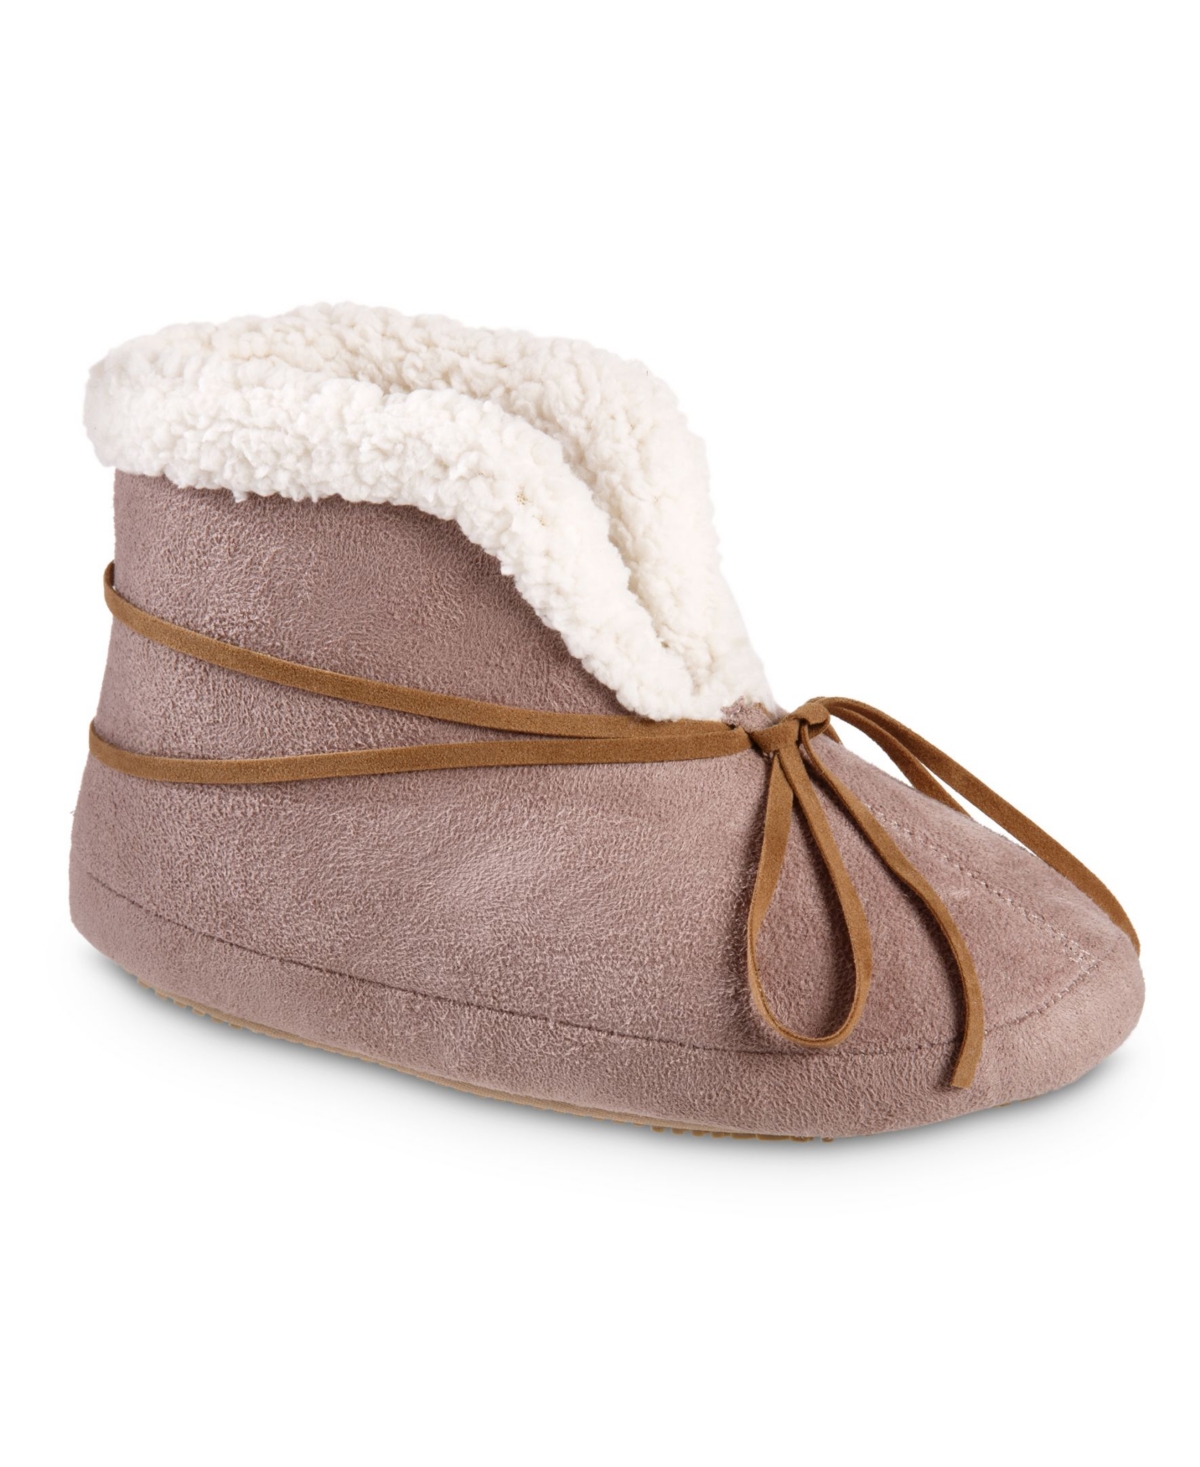 Women's Rory Bootie Slippers - Woodberry